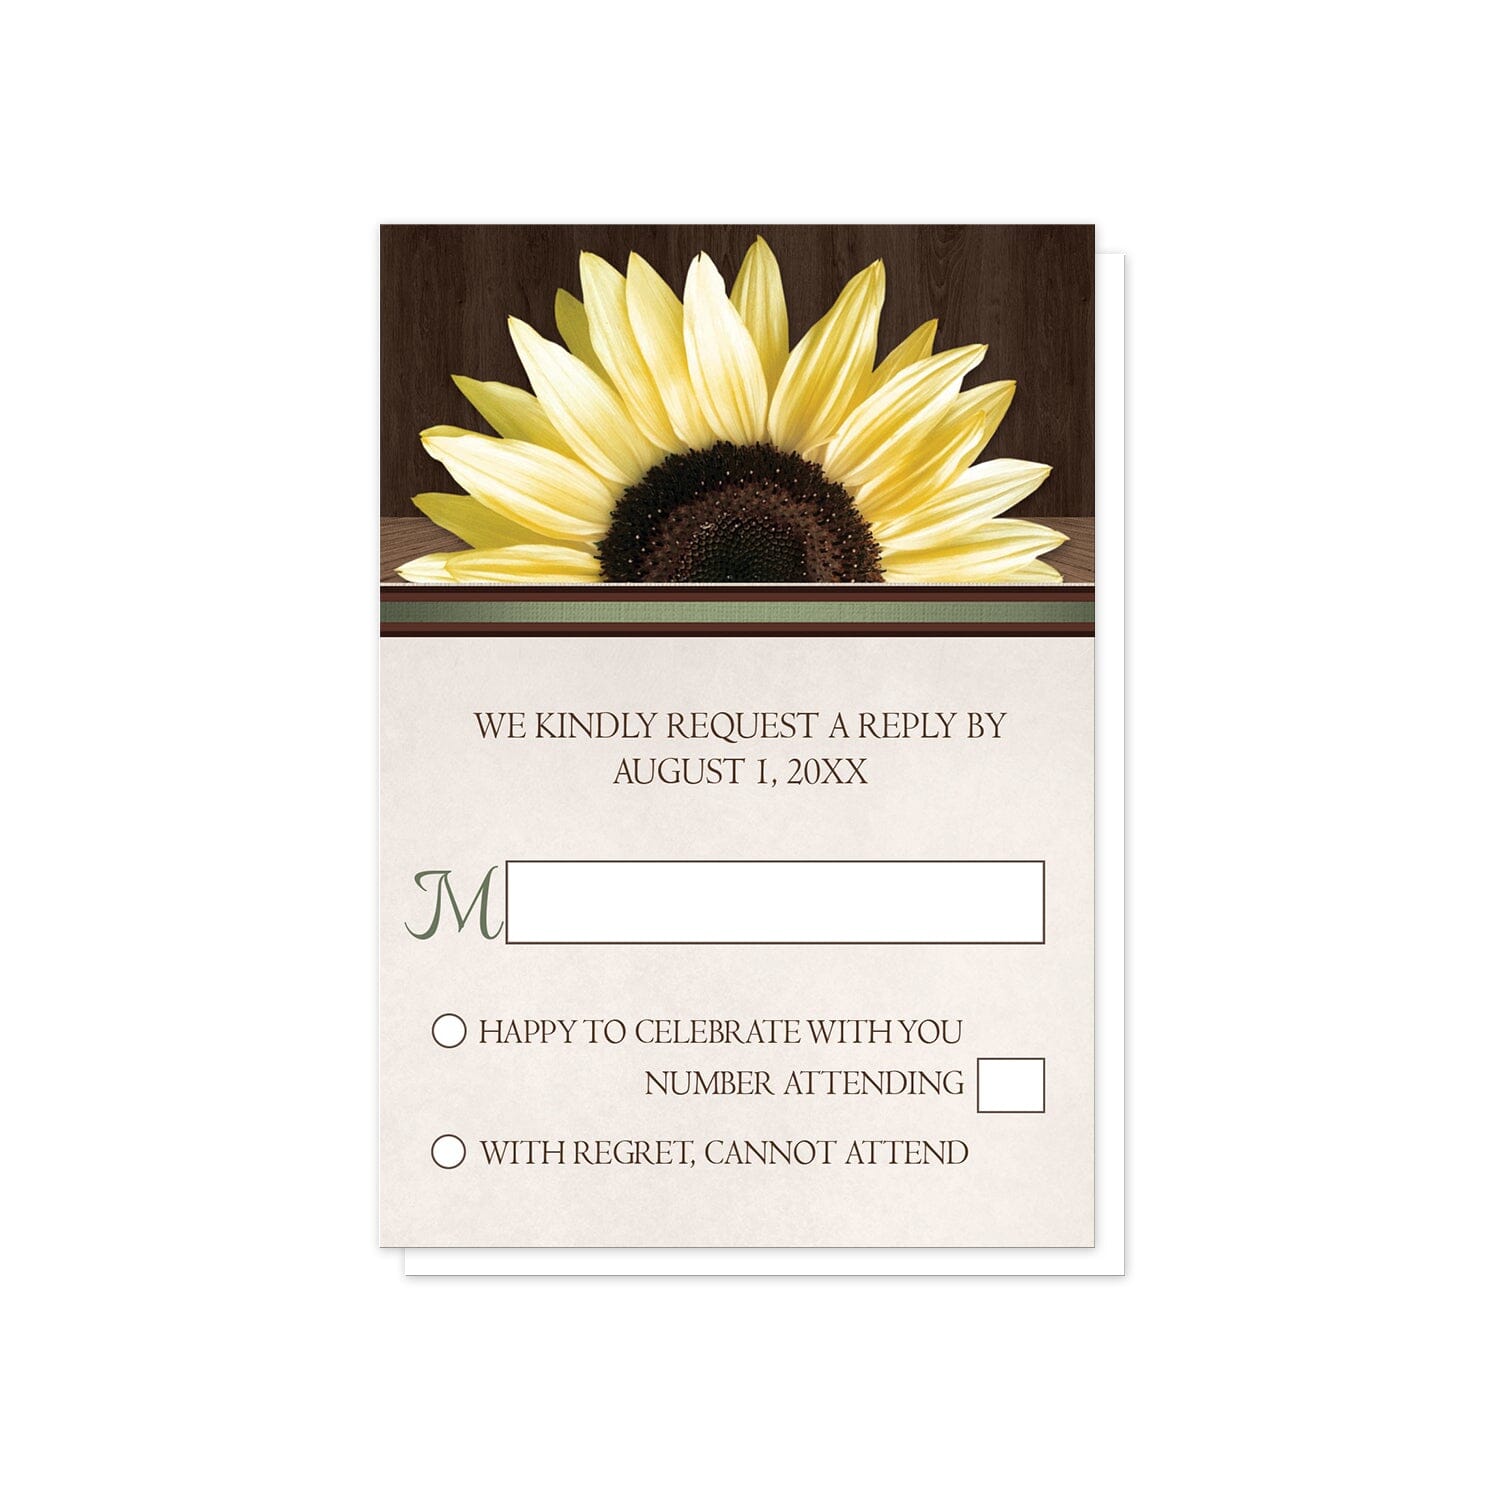 Country Sunflower Over Wood Rustic RSVP Cards at Artistically Invited.